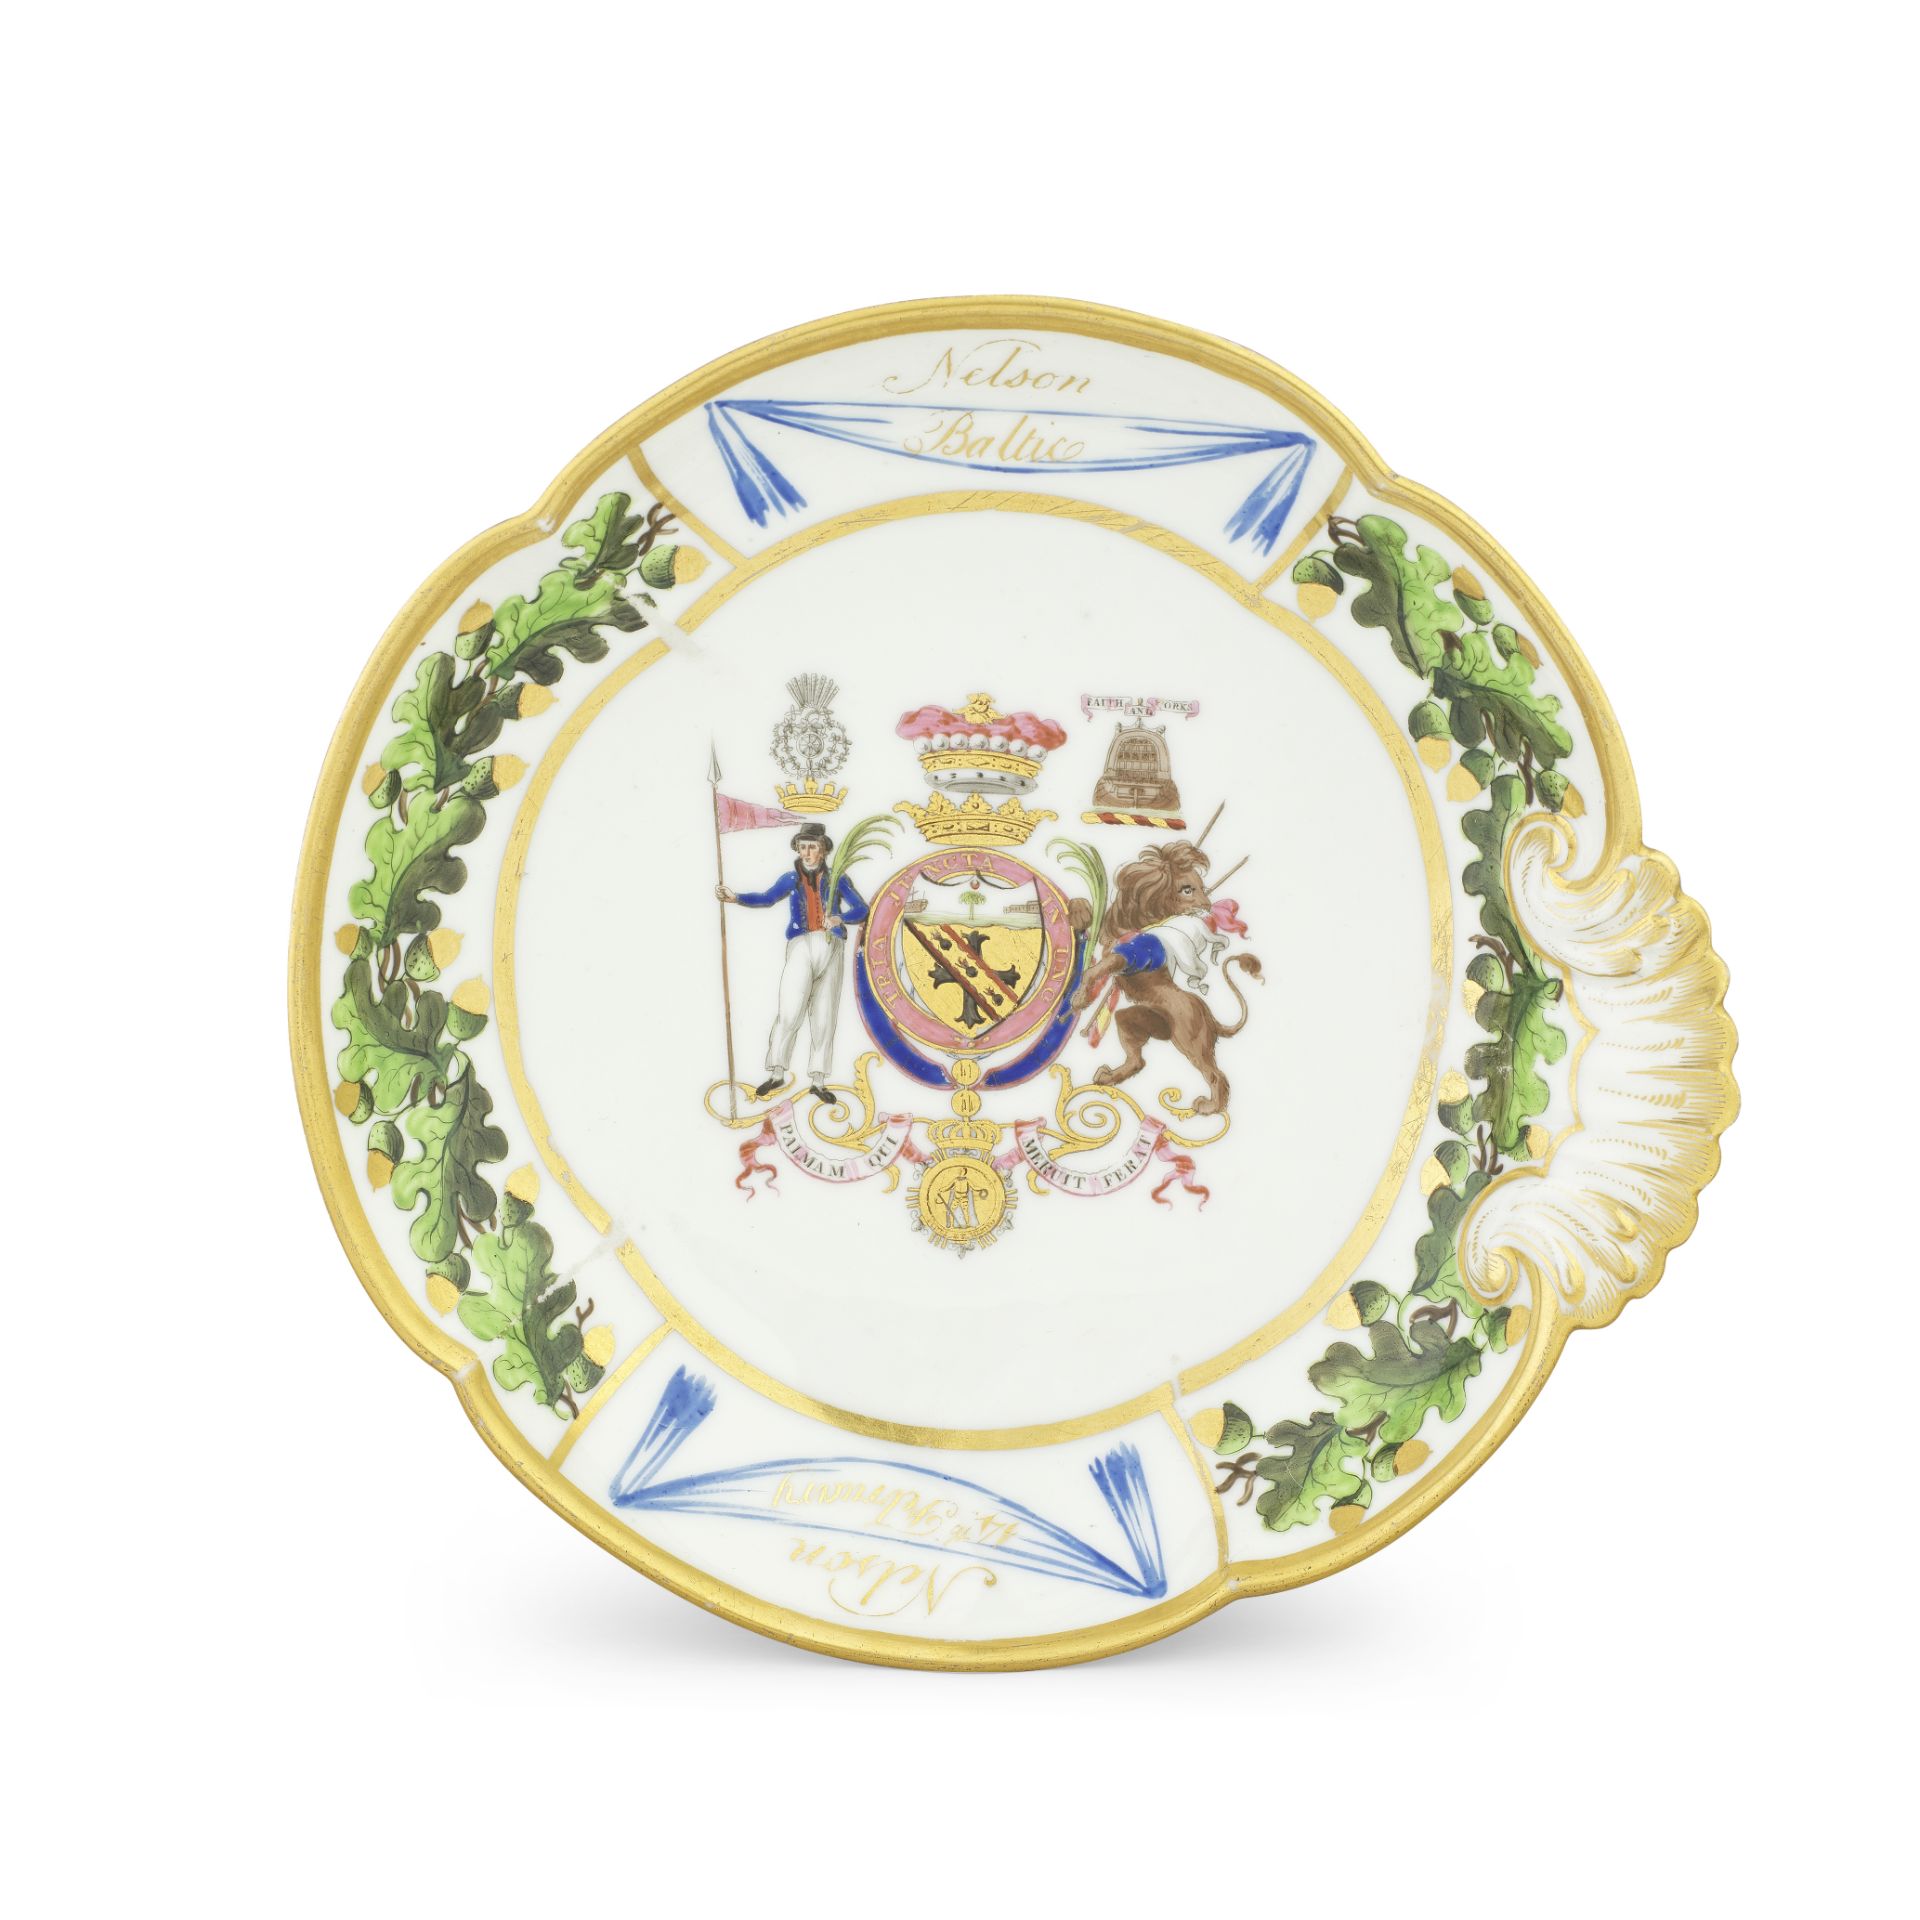 A London-decorated Paris dish from the 'Nelson Set Dessert Service', circa 1802